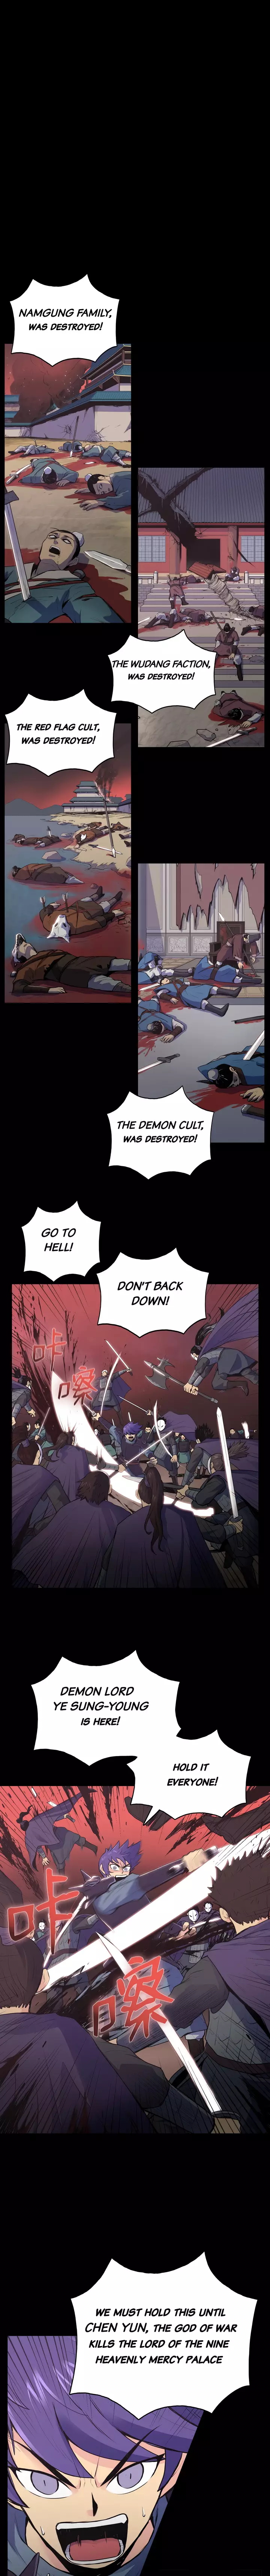 The God Of War - 1 page 2